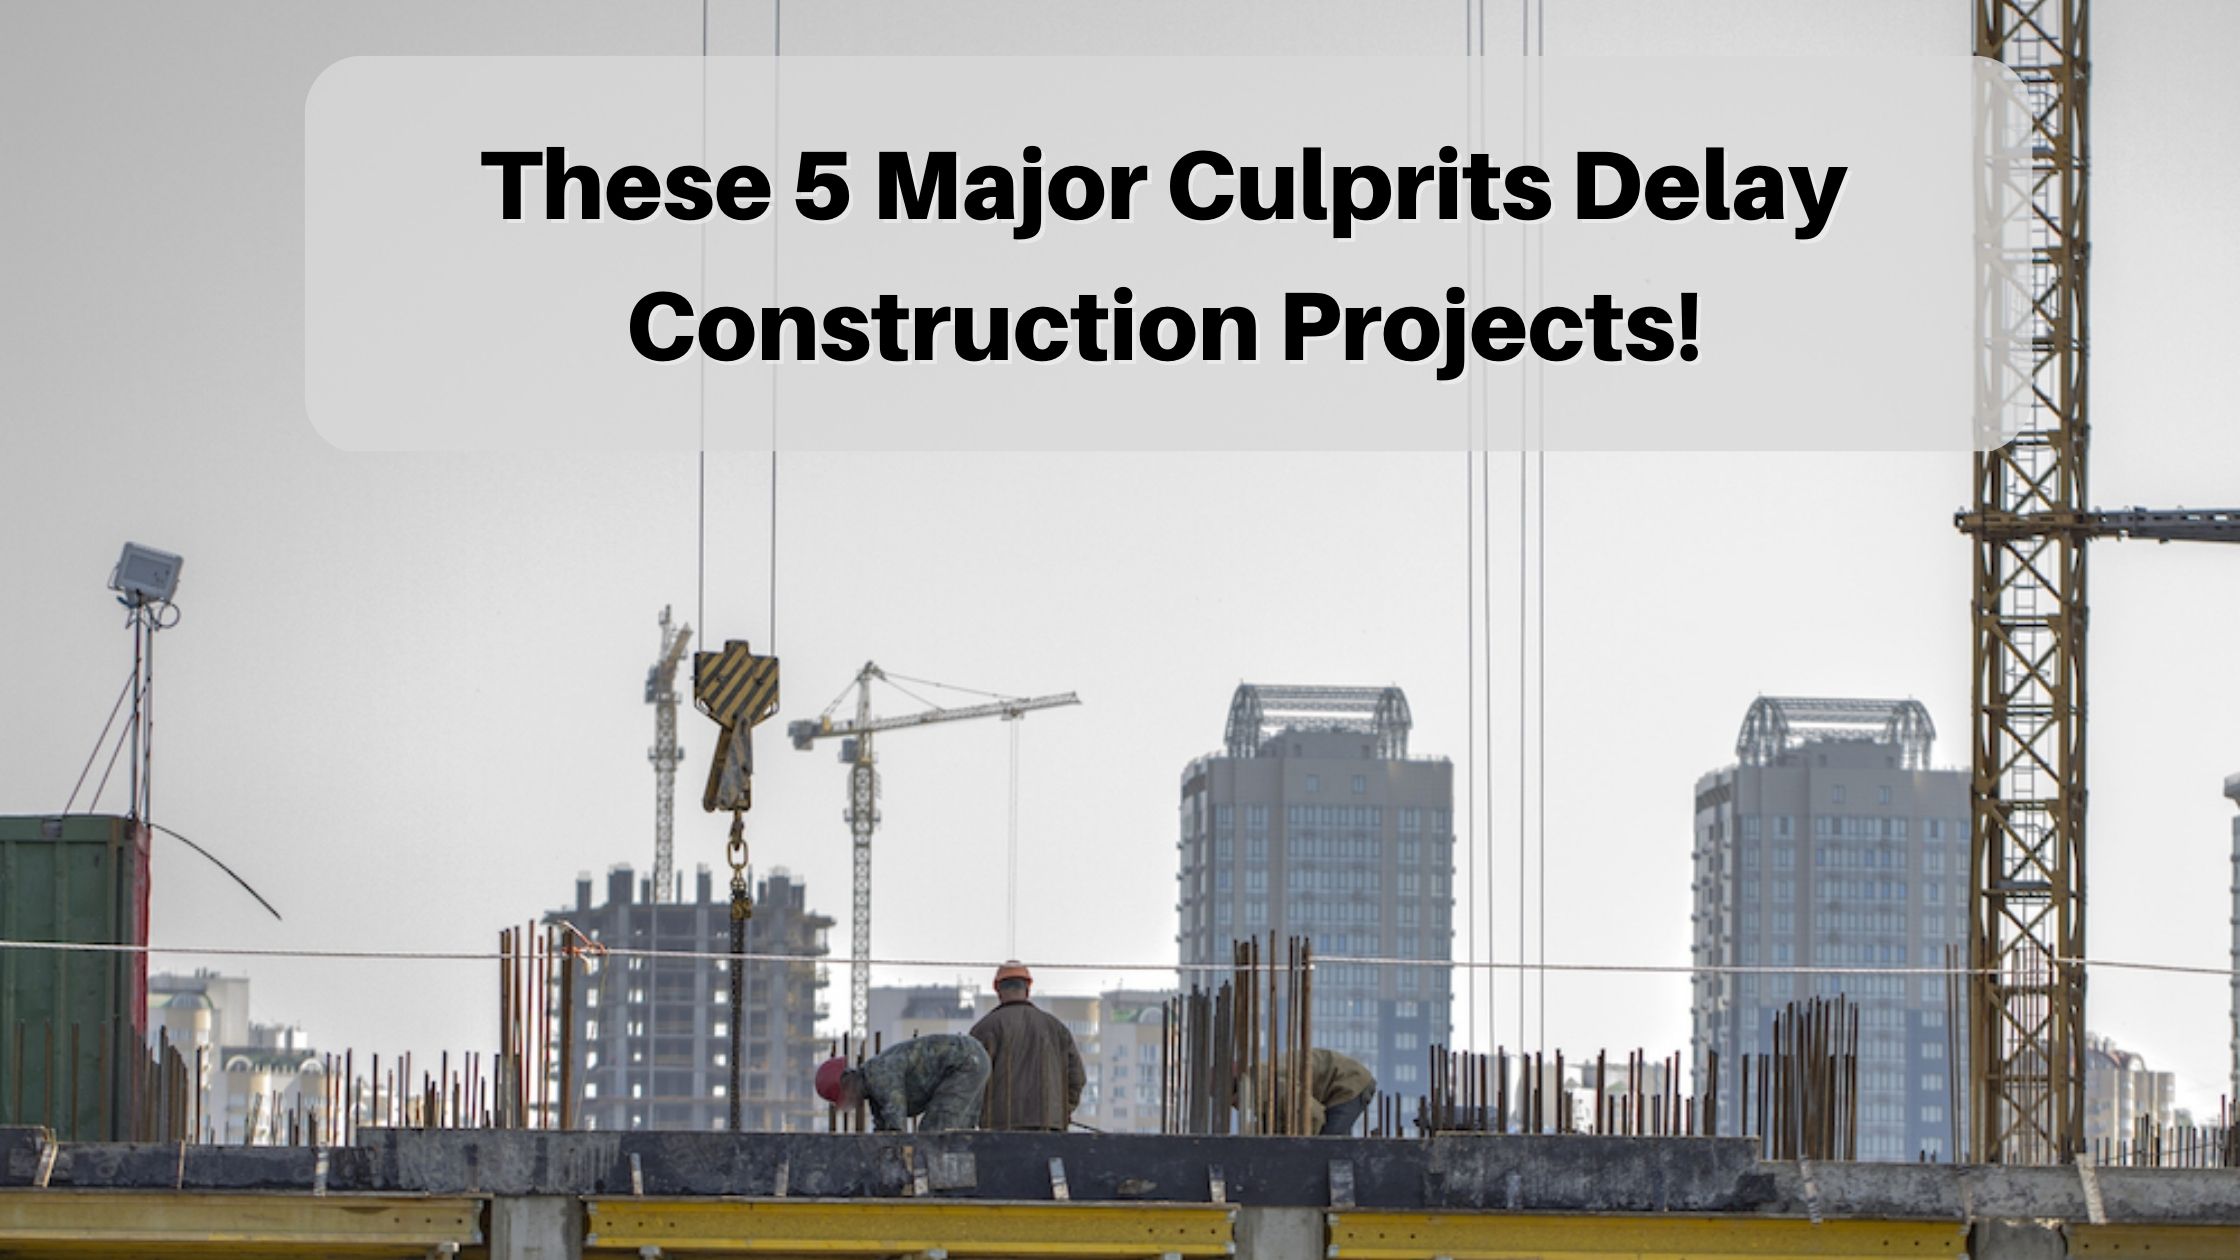 These 5 Major Culprits Delay Construction Projects!